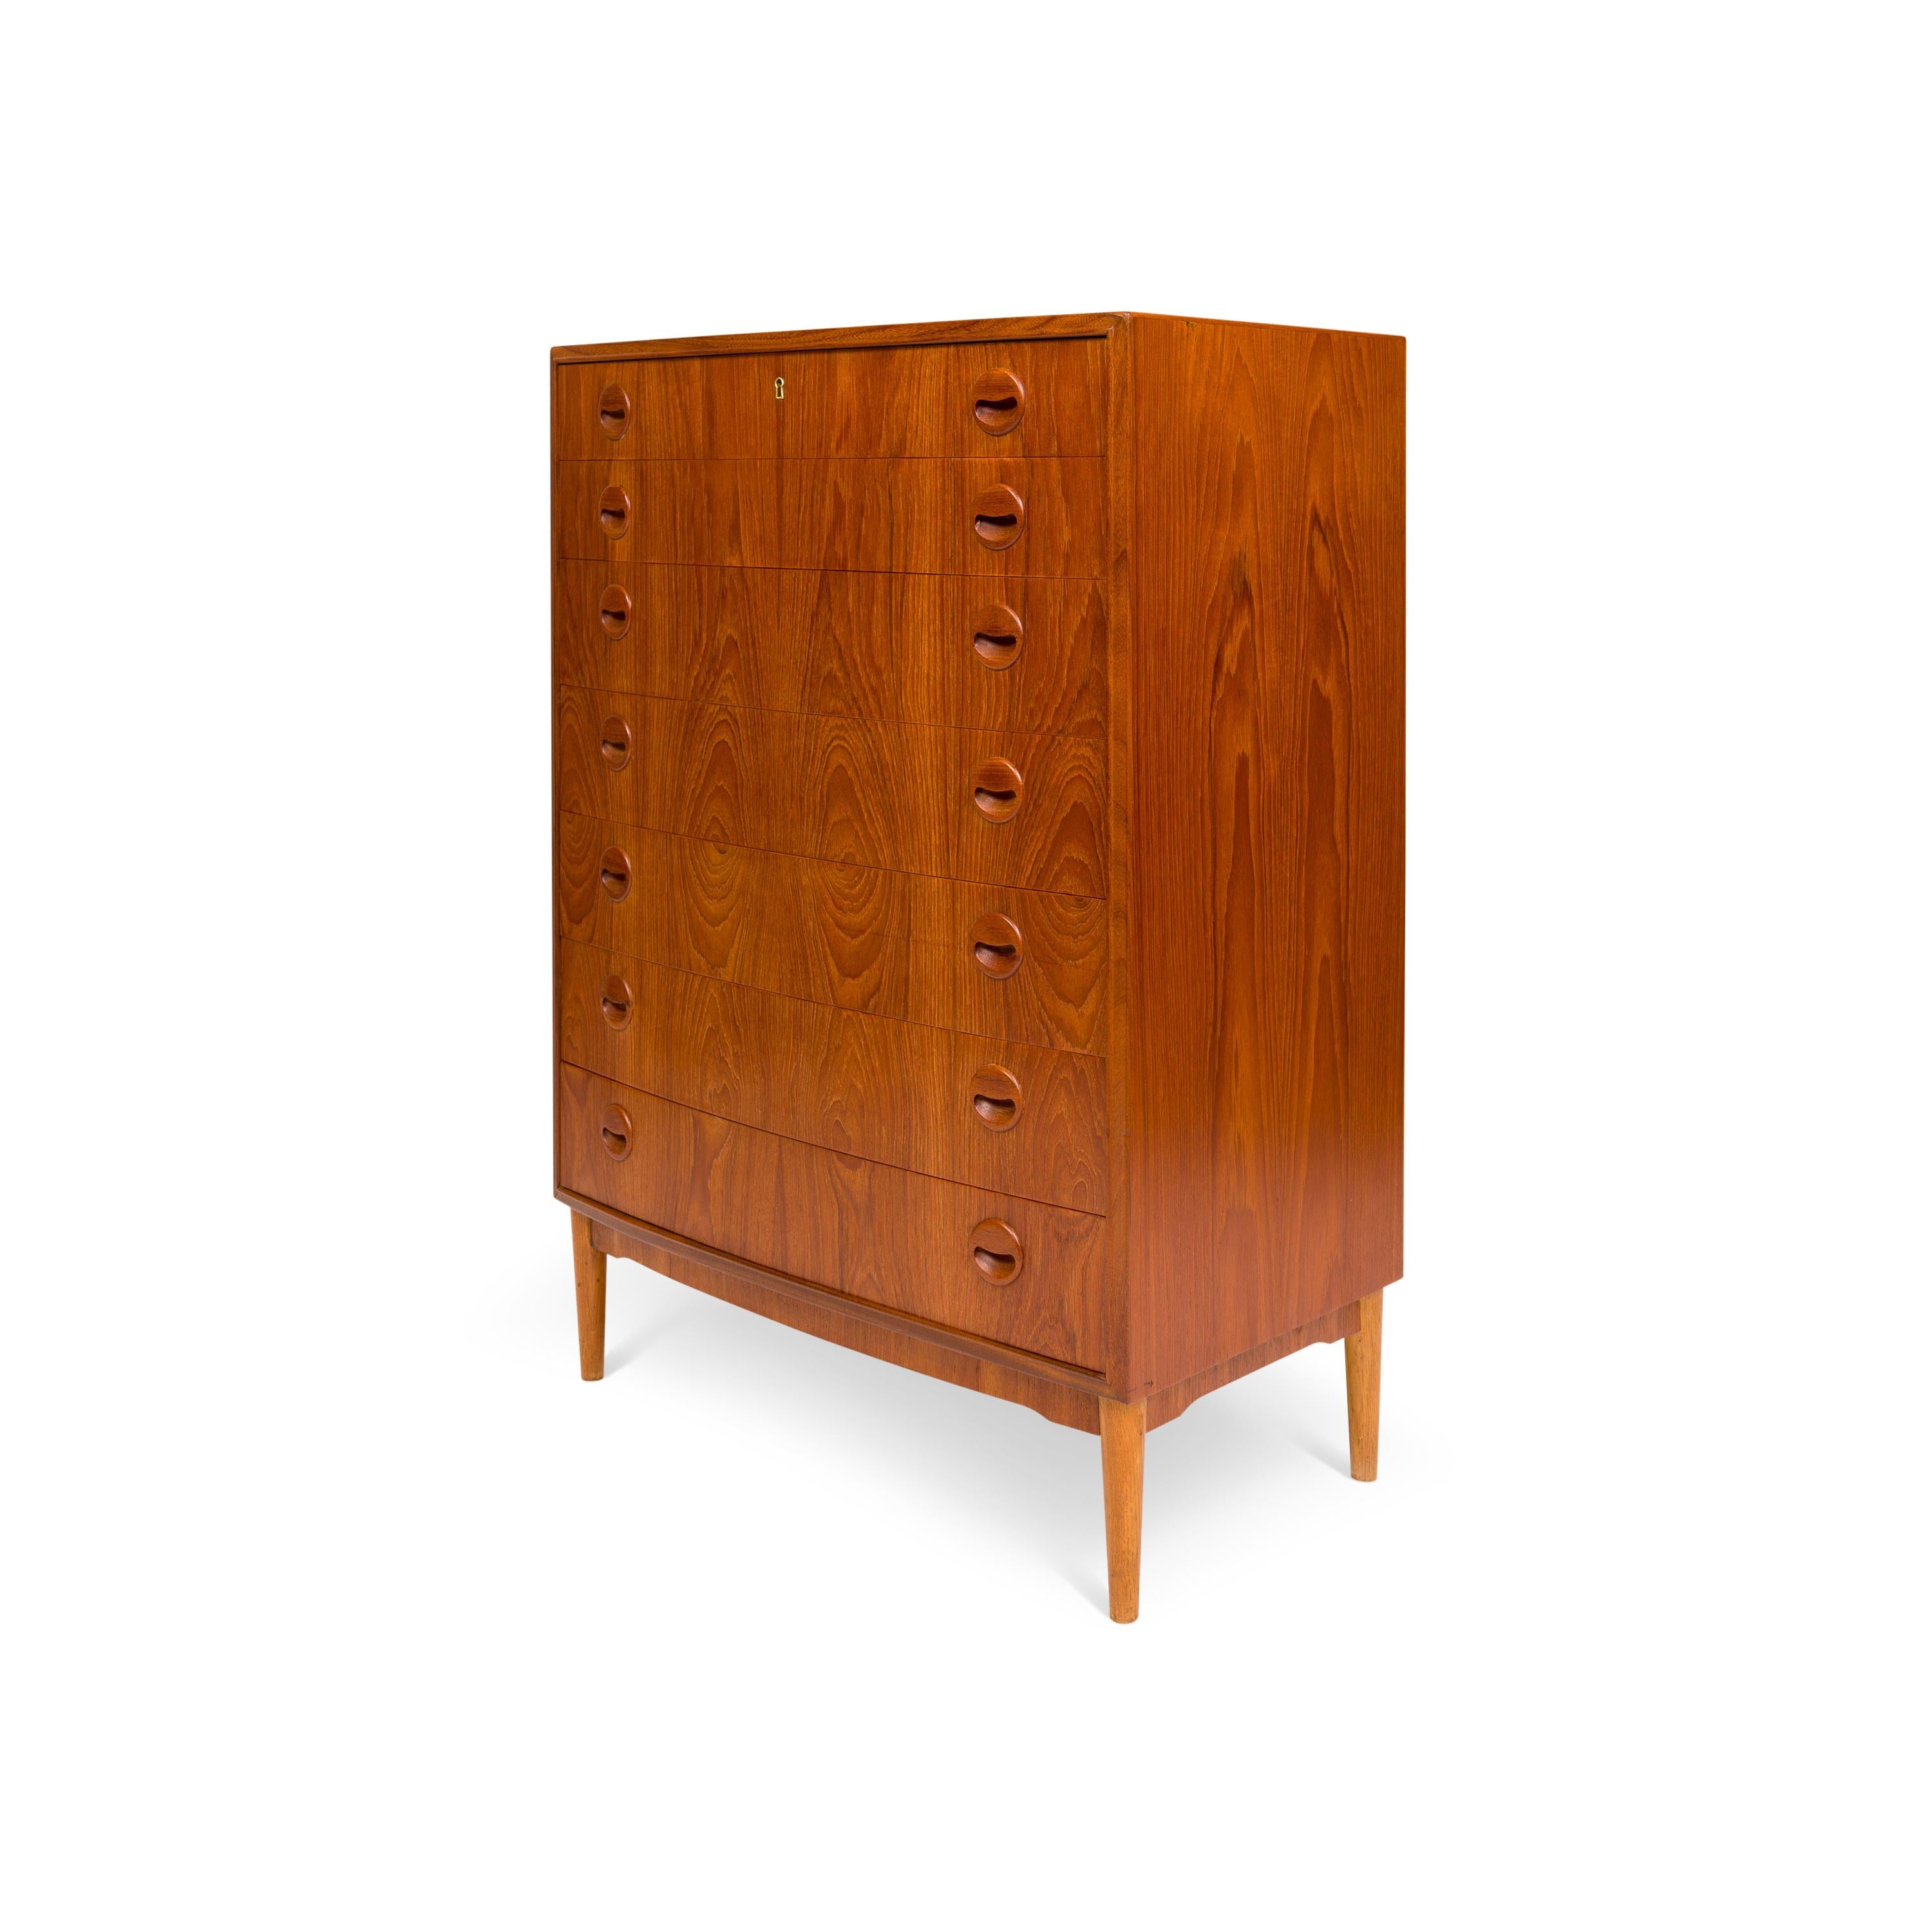 This Danish tallboy chest of drawers embodies the essence of Mid-Century design. Its seven drawers, adorned with sculptured wooden handles and seamless dovetail joins, effortlessly combine functionality with elegance. The natural teak grain adorns